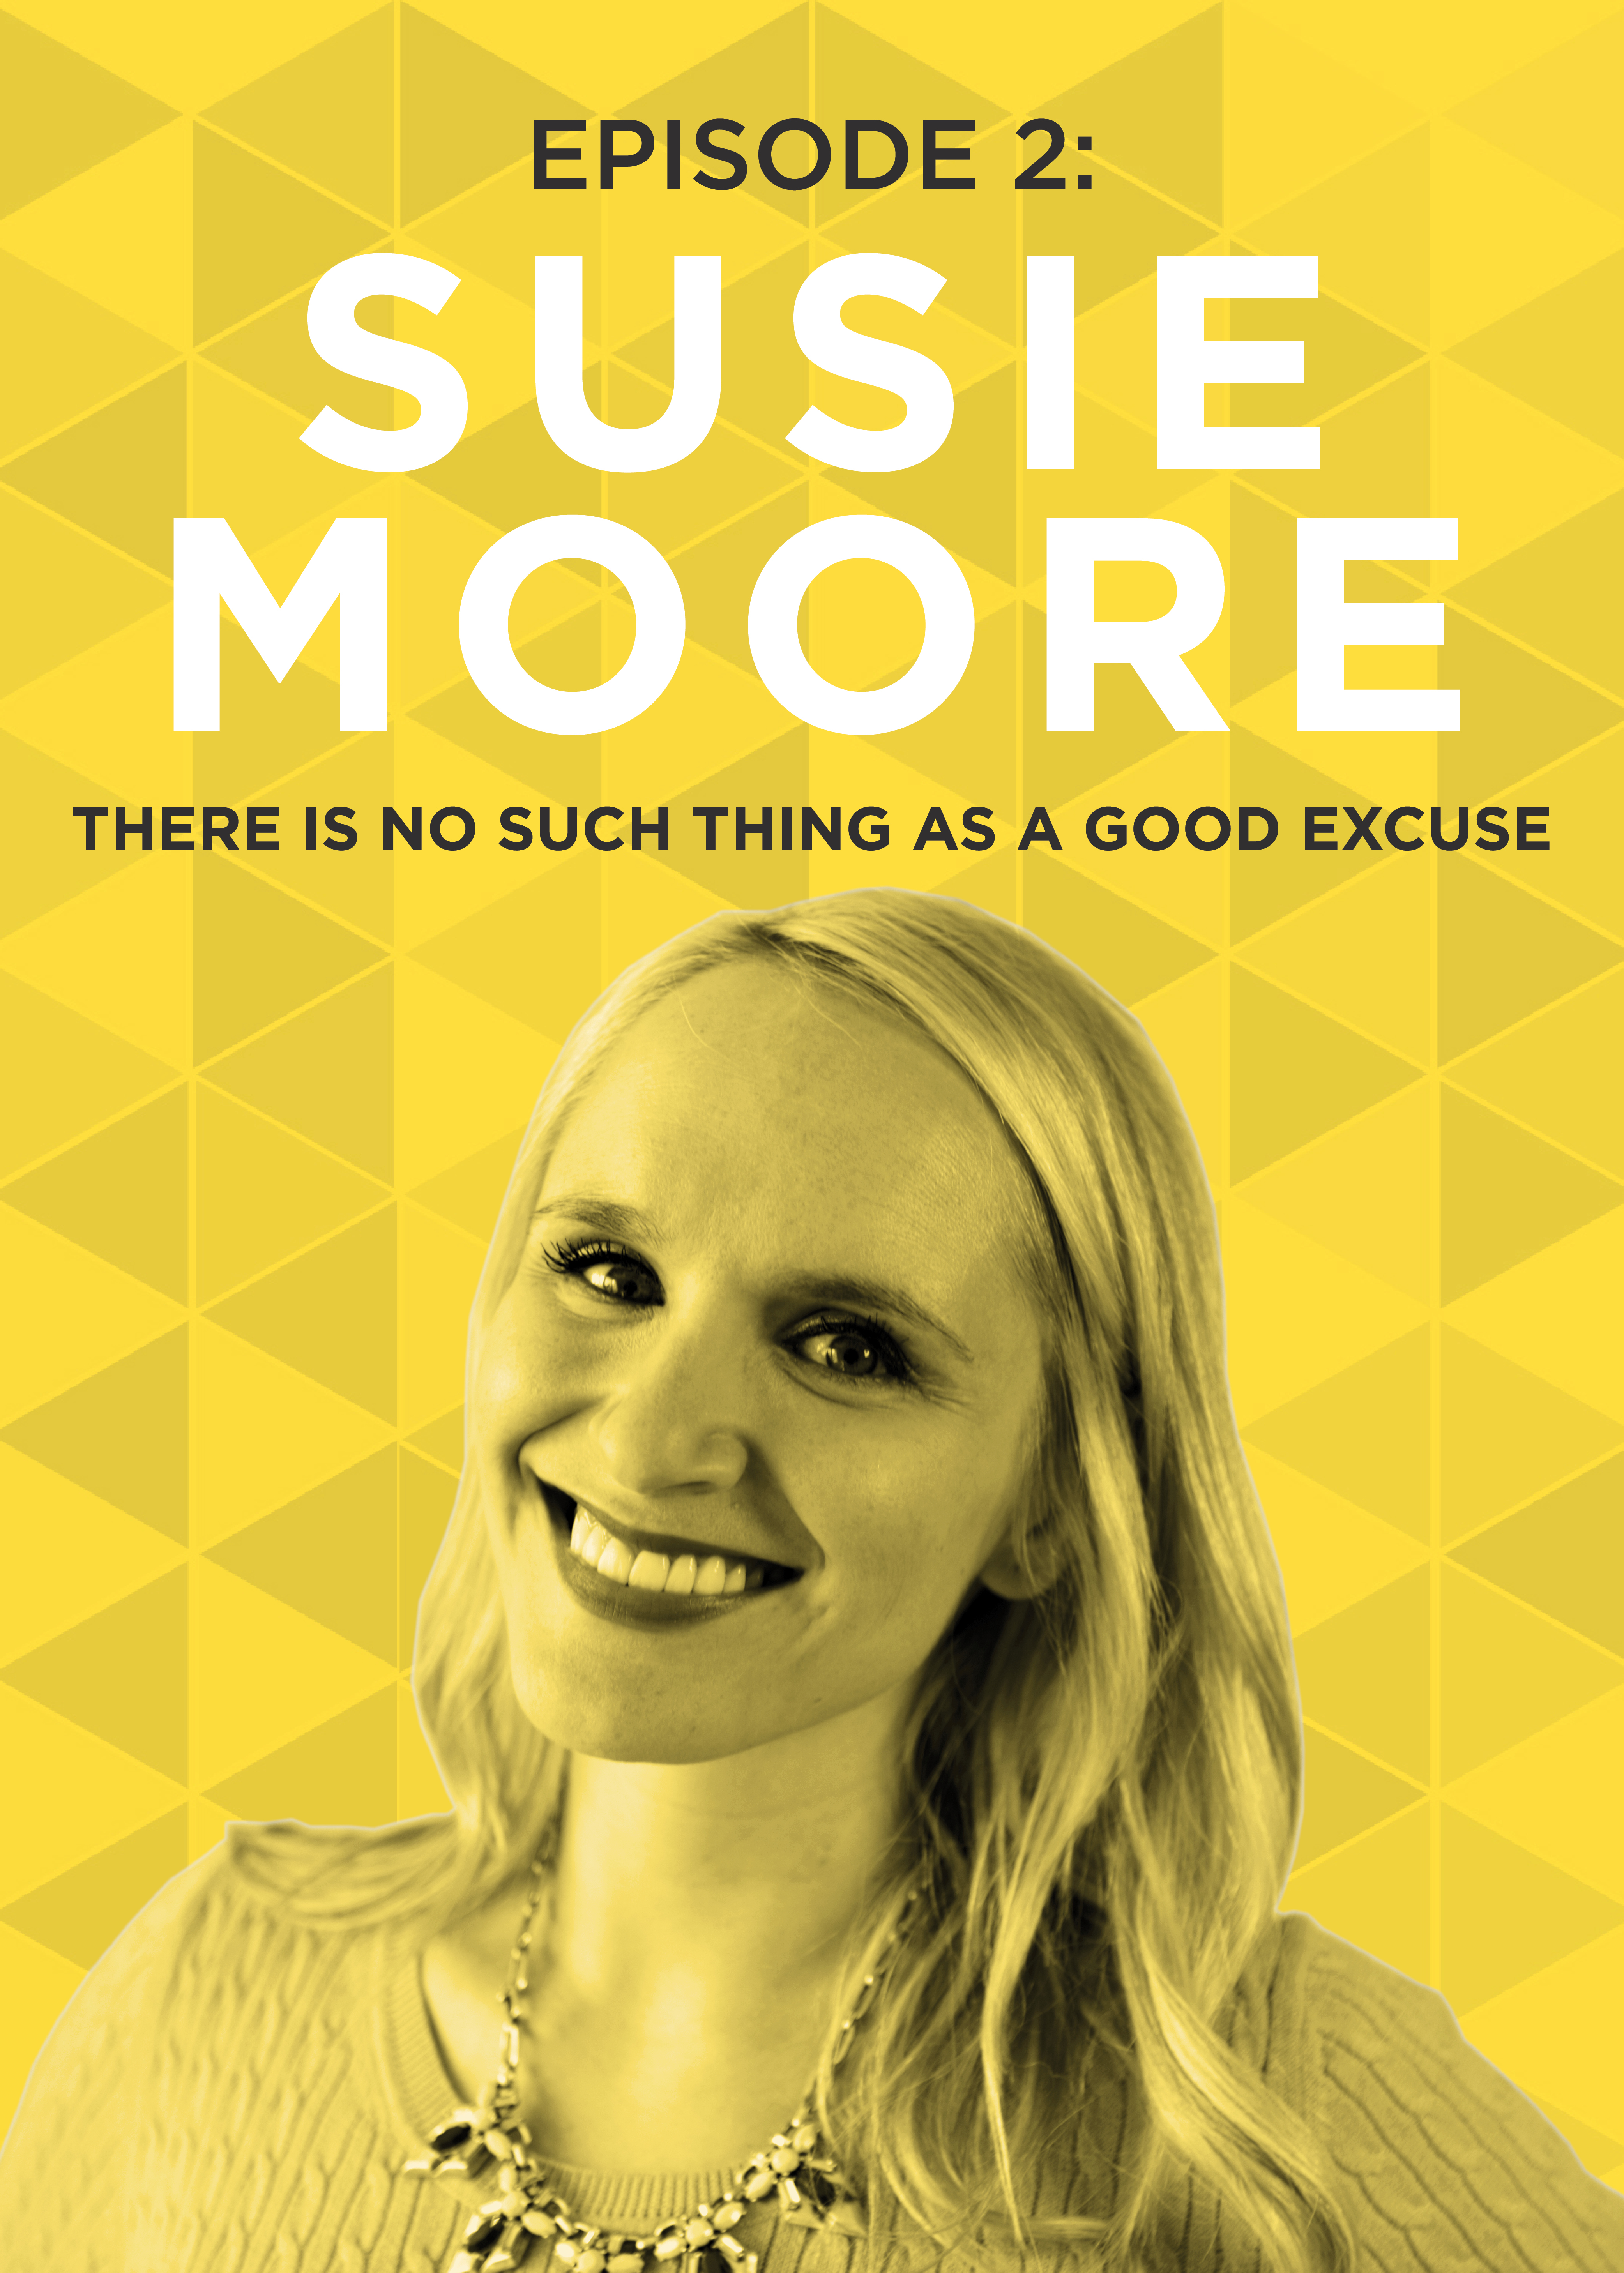 EP 2: There’s No Such Thing as a Good Excuse with Susie Moore